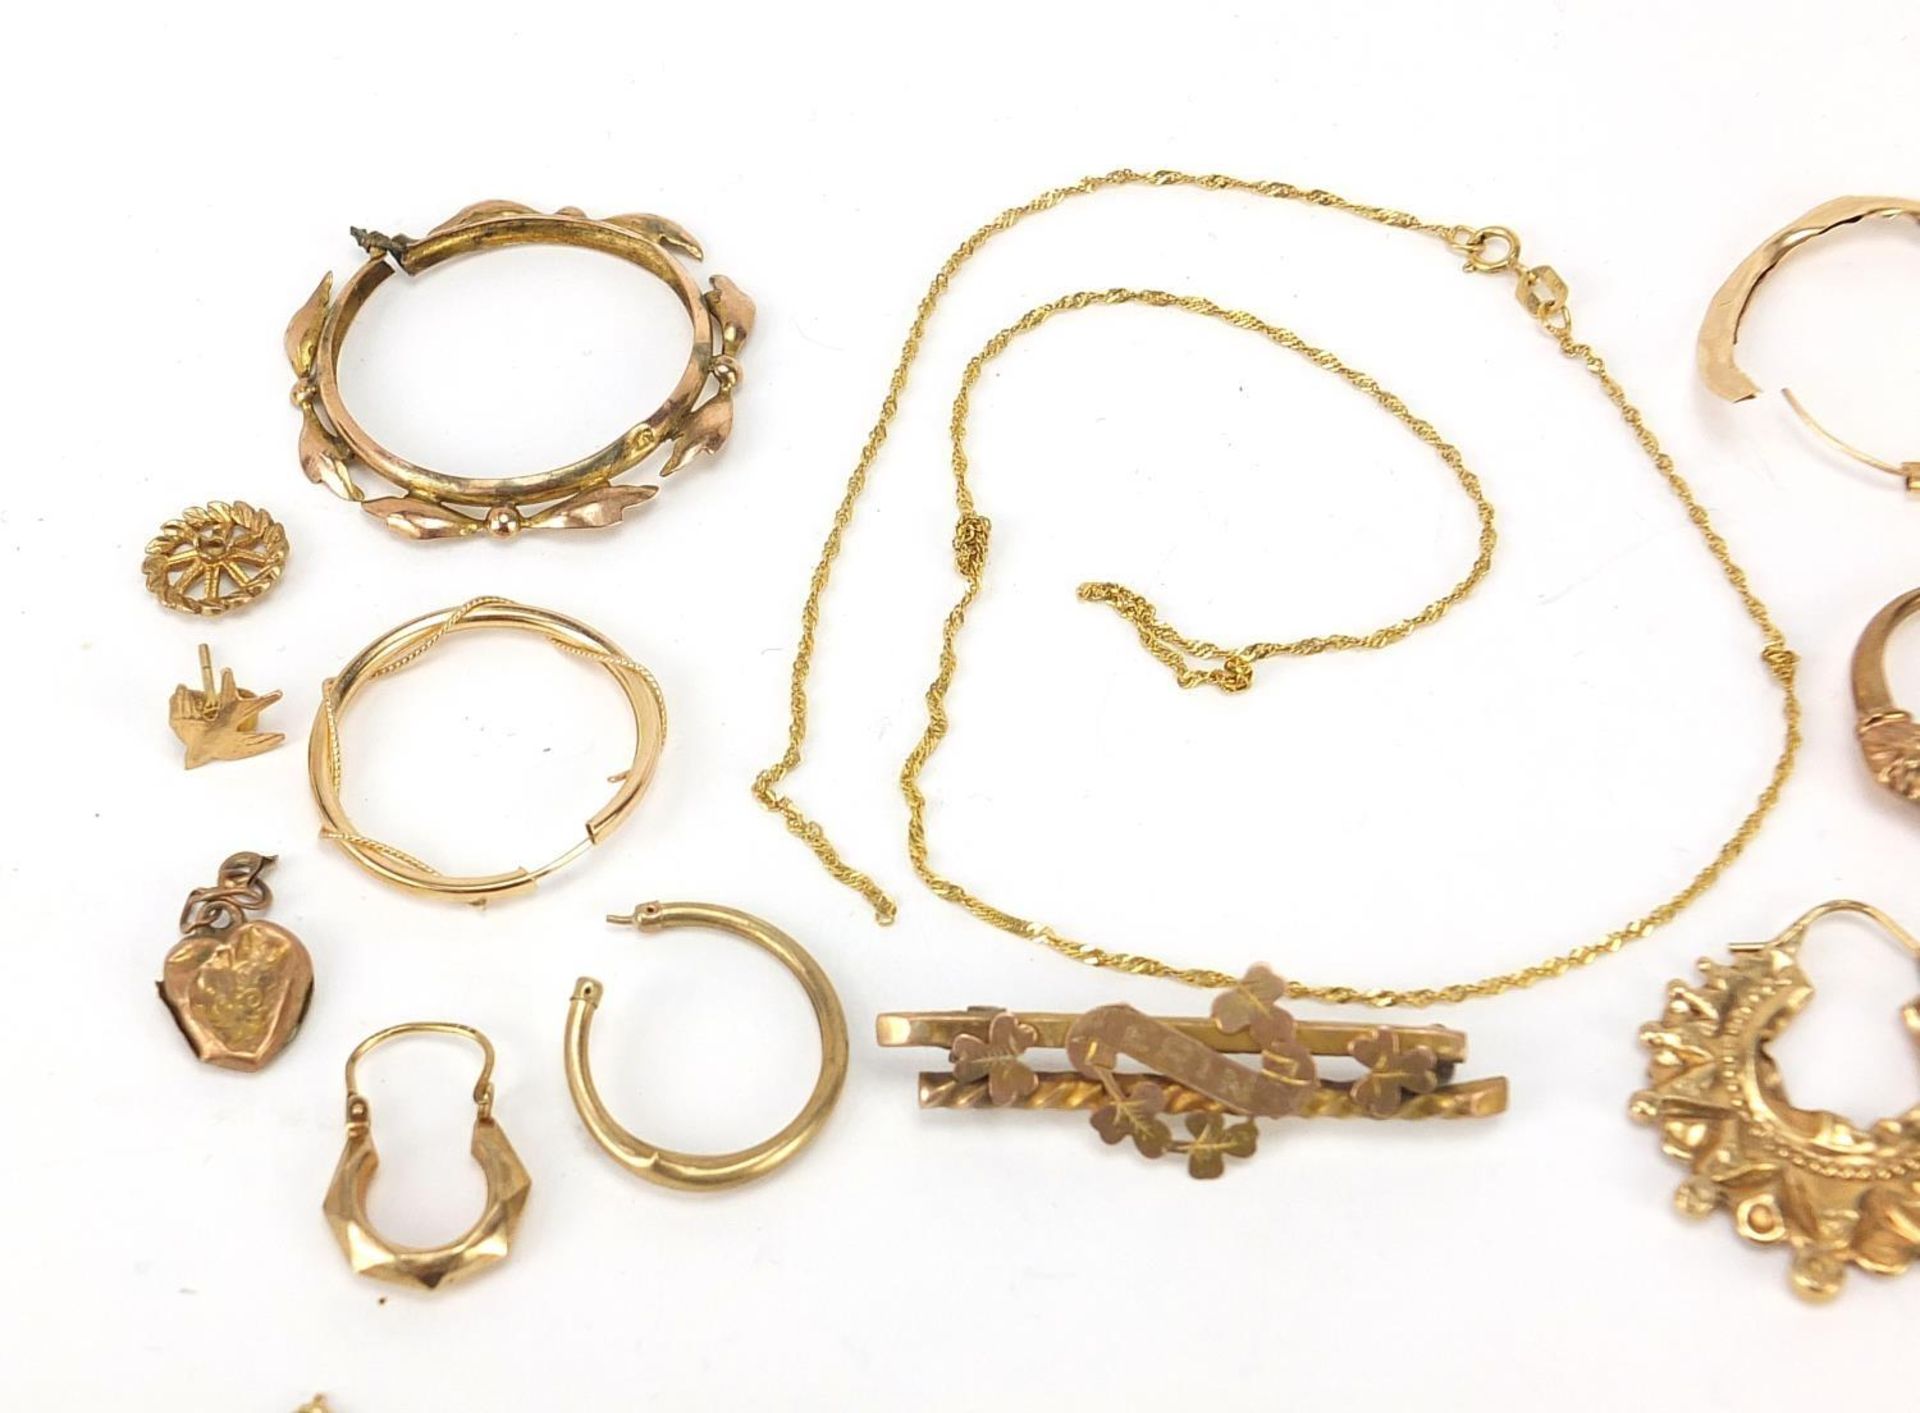 9ct gold jewellery including earrings, necklaces, Victorian bar brooch and 14ct gold fountain pen - Image 2 of 9